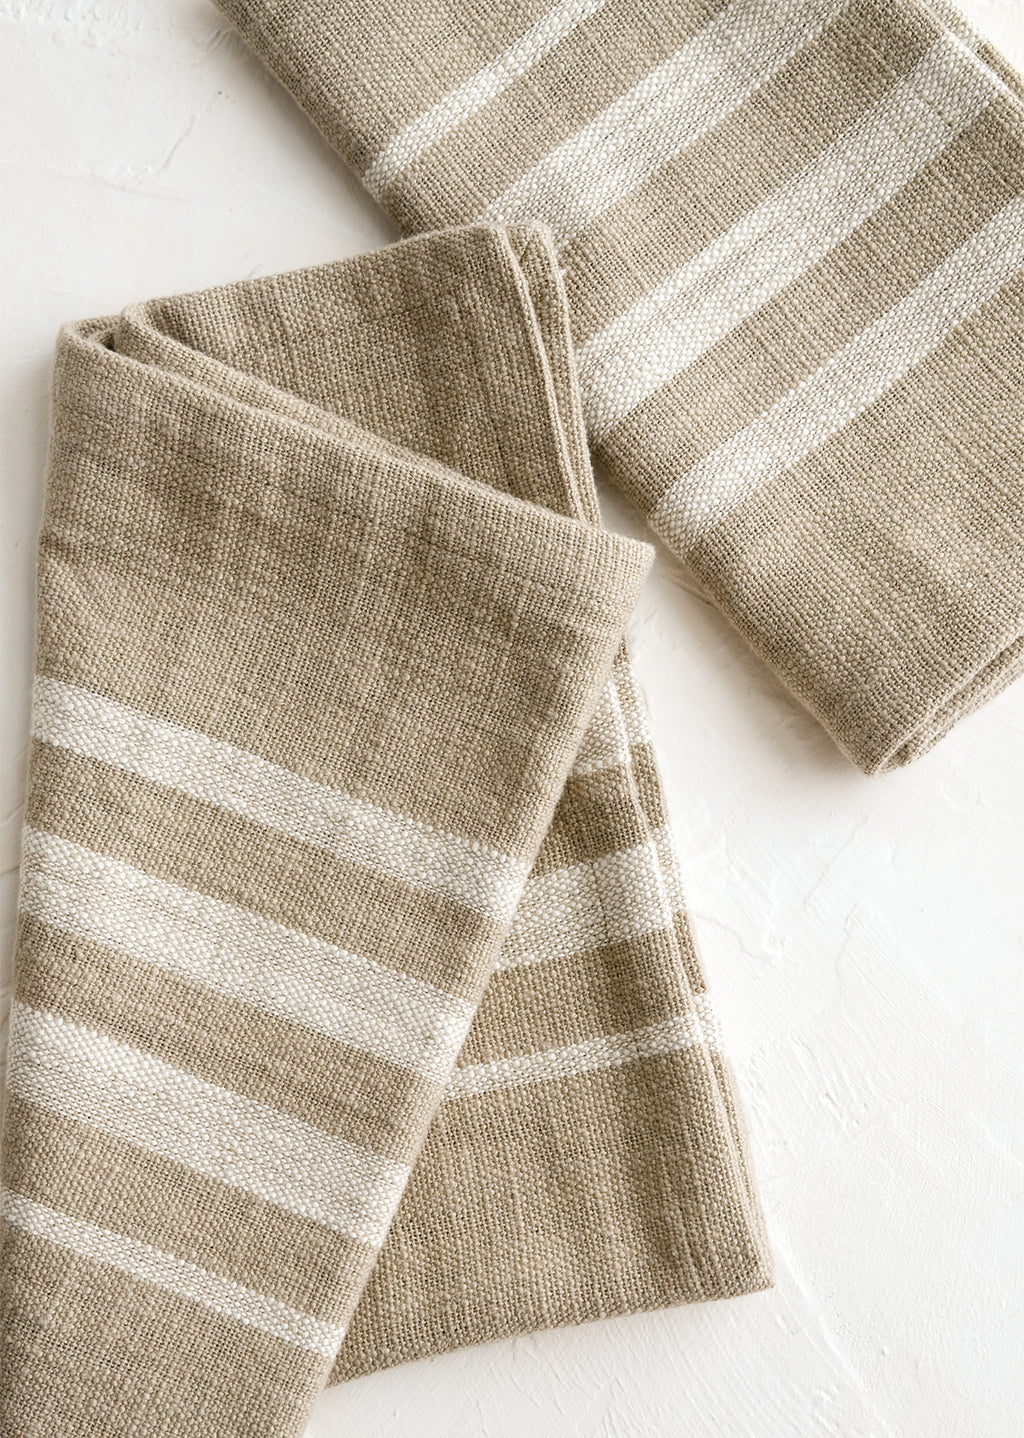 Tan / Ivory (Partial Stripe): A pair of folded napkins in tan with ivory stripes.